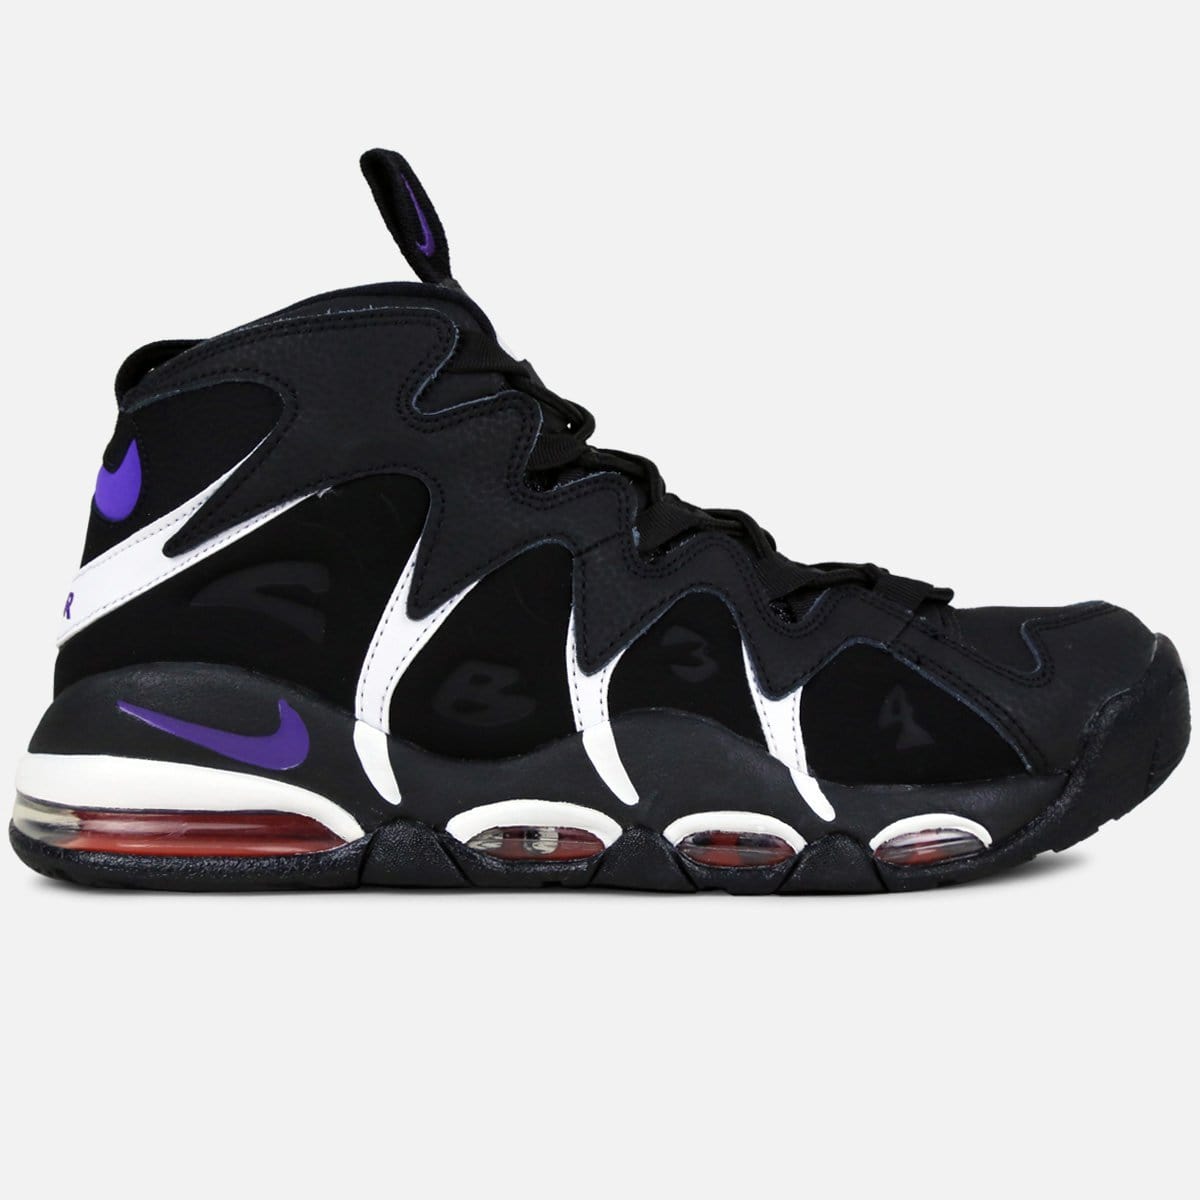 Coming Soon: Nike Air Max2 CB '94 “Black and Purple” – DTLR